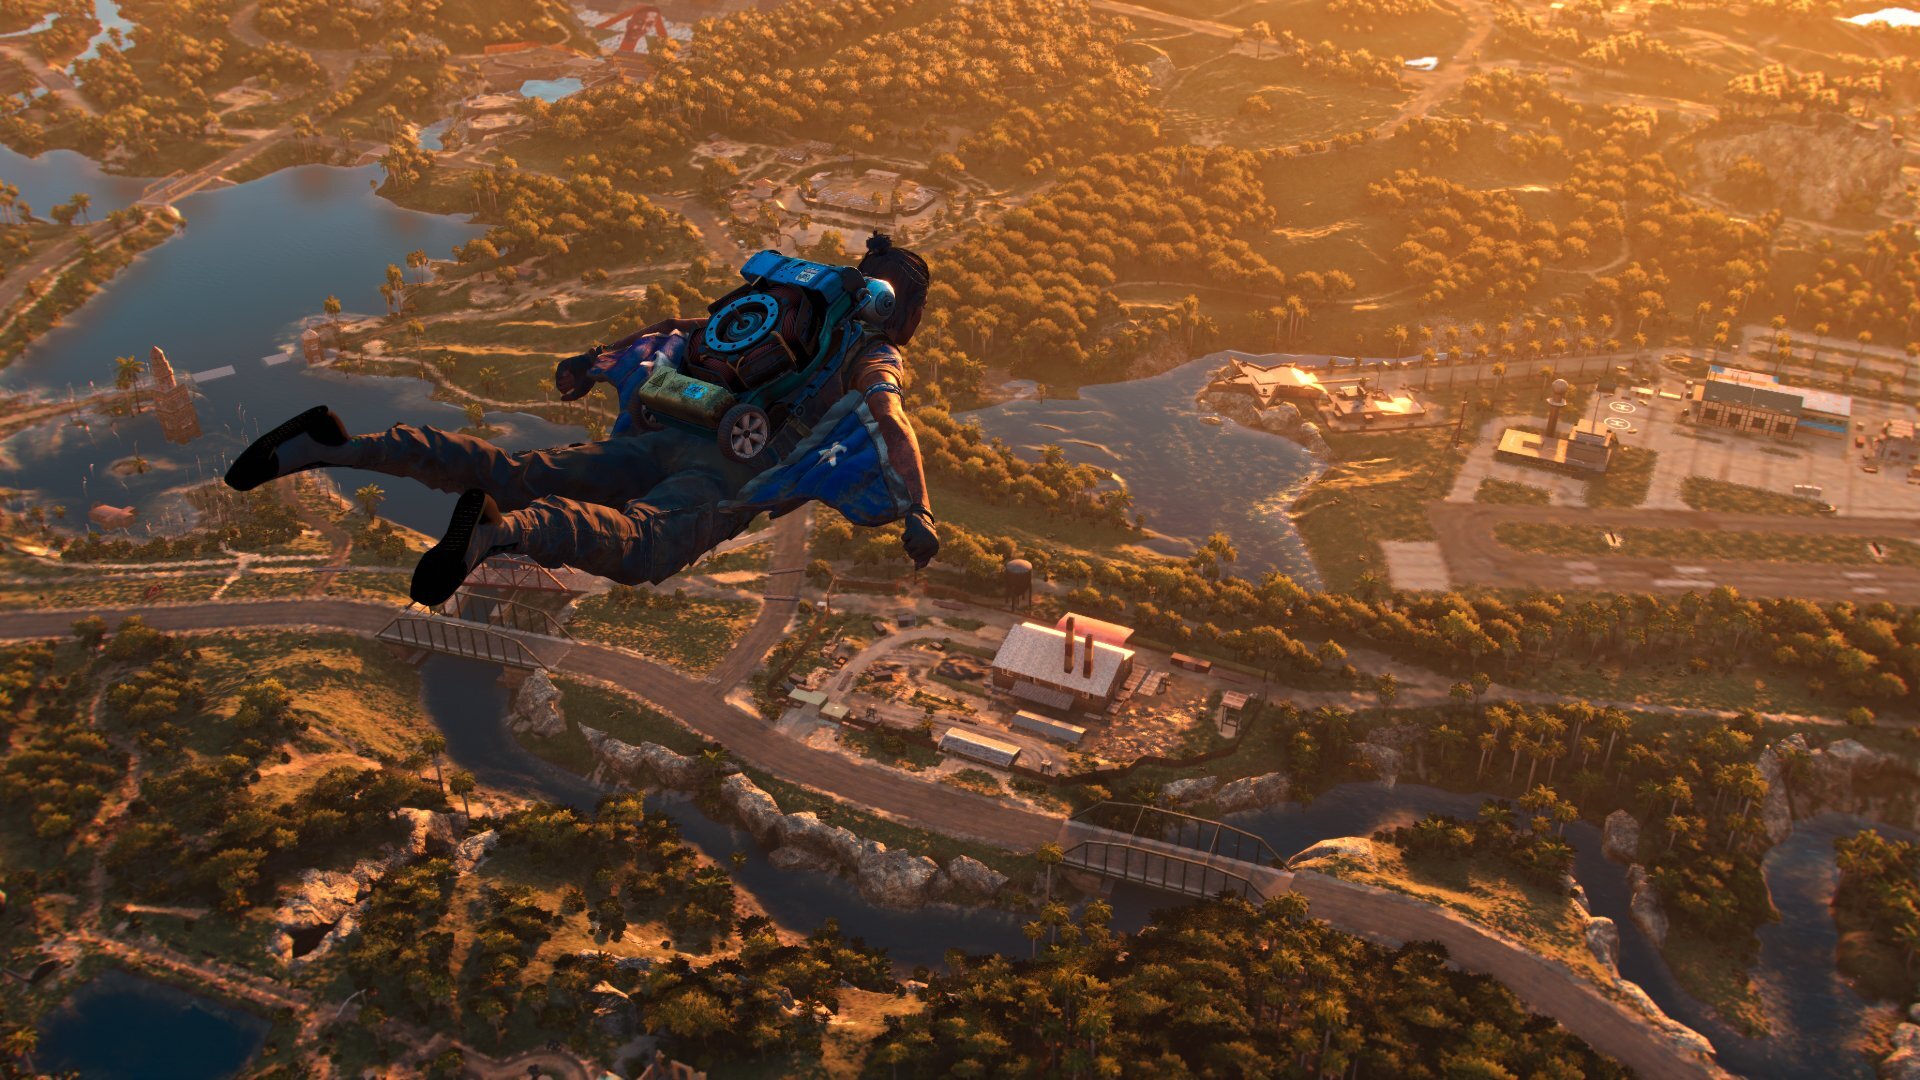 Dani using the wingsuit to fly over Yara at sunset.